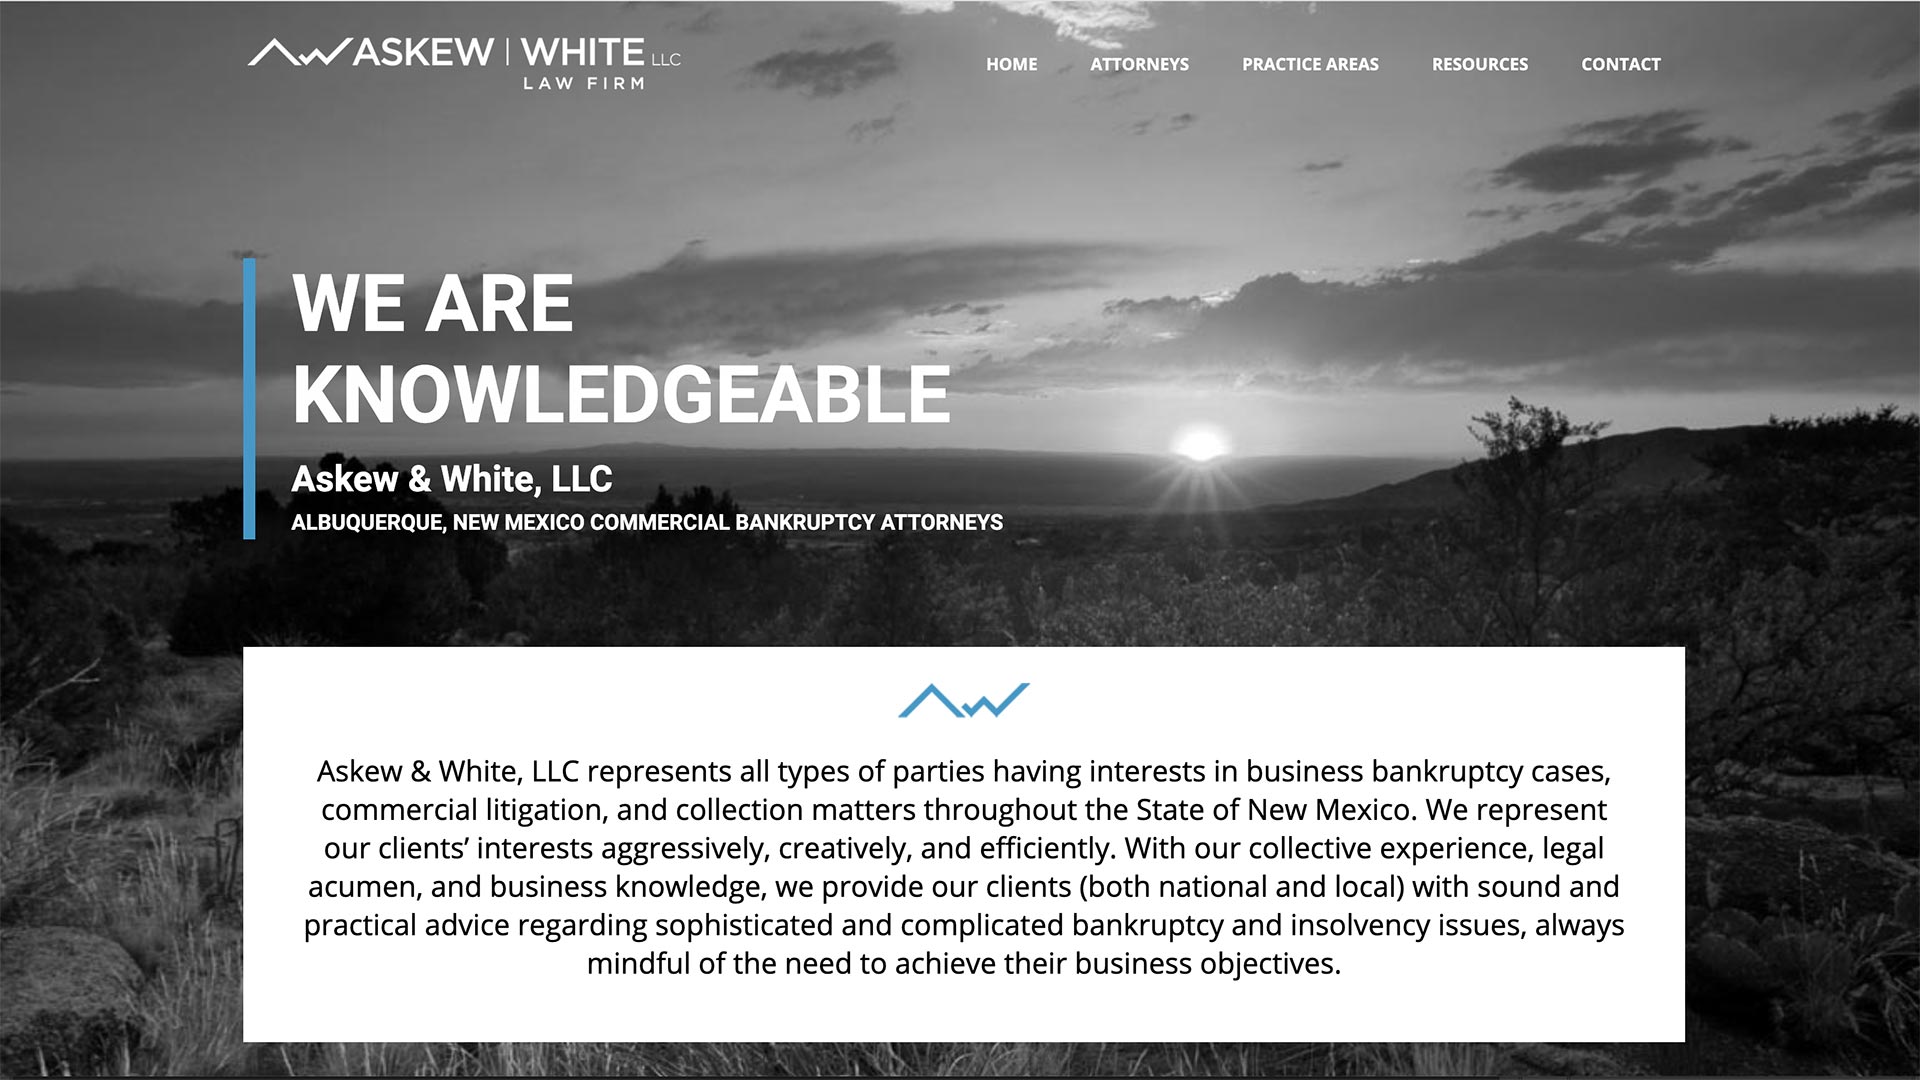 New Mexico Law Firm Website Design: Askew & White